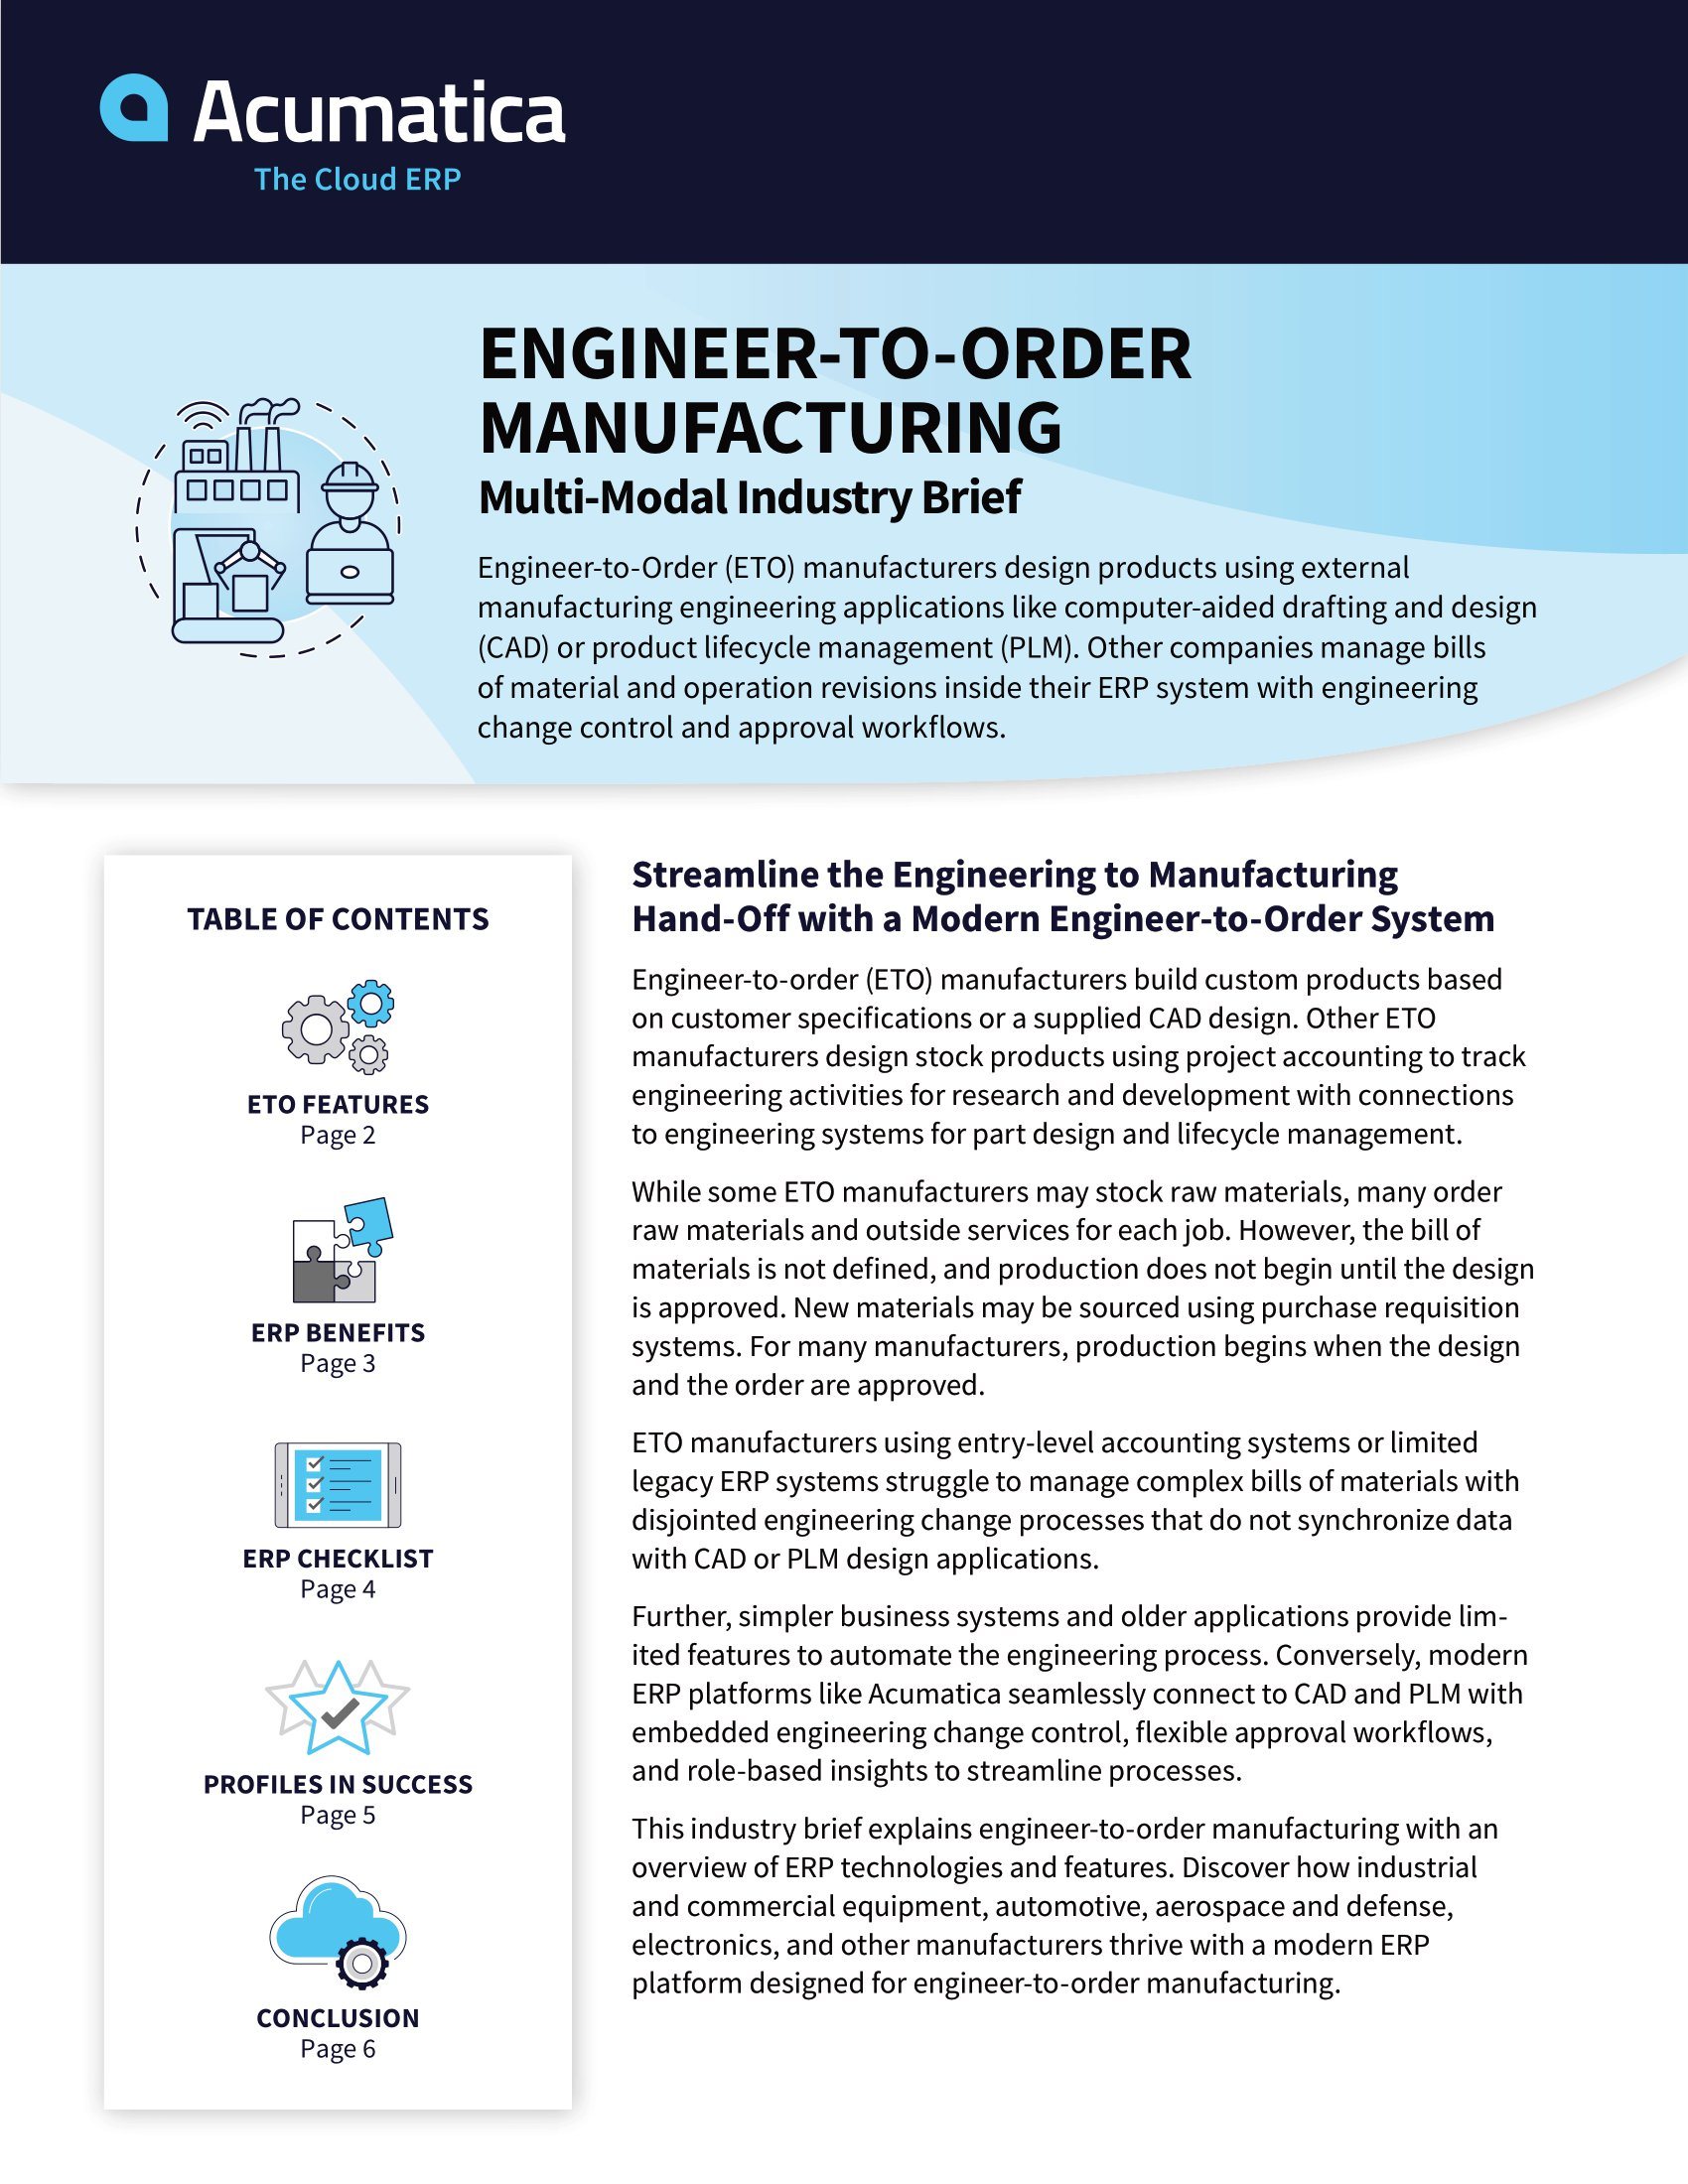 How Engineer-to-Order Manufacturers Can Thrive with a Modern ERP Solution, page 0